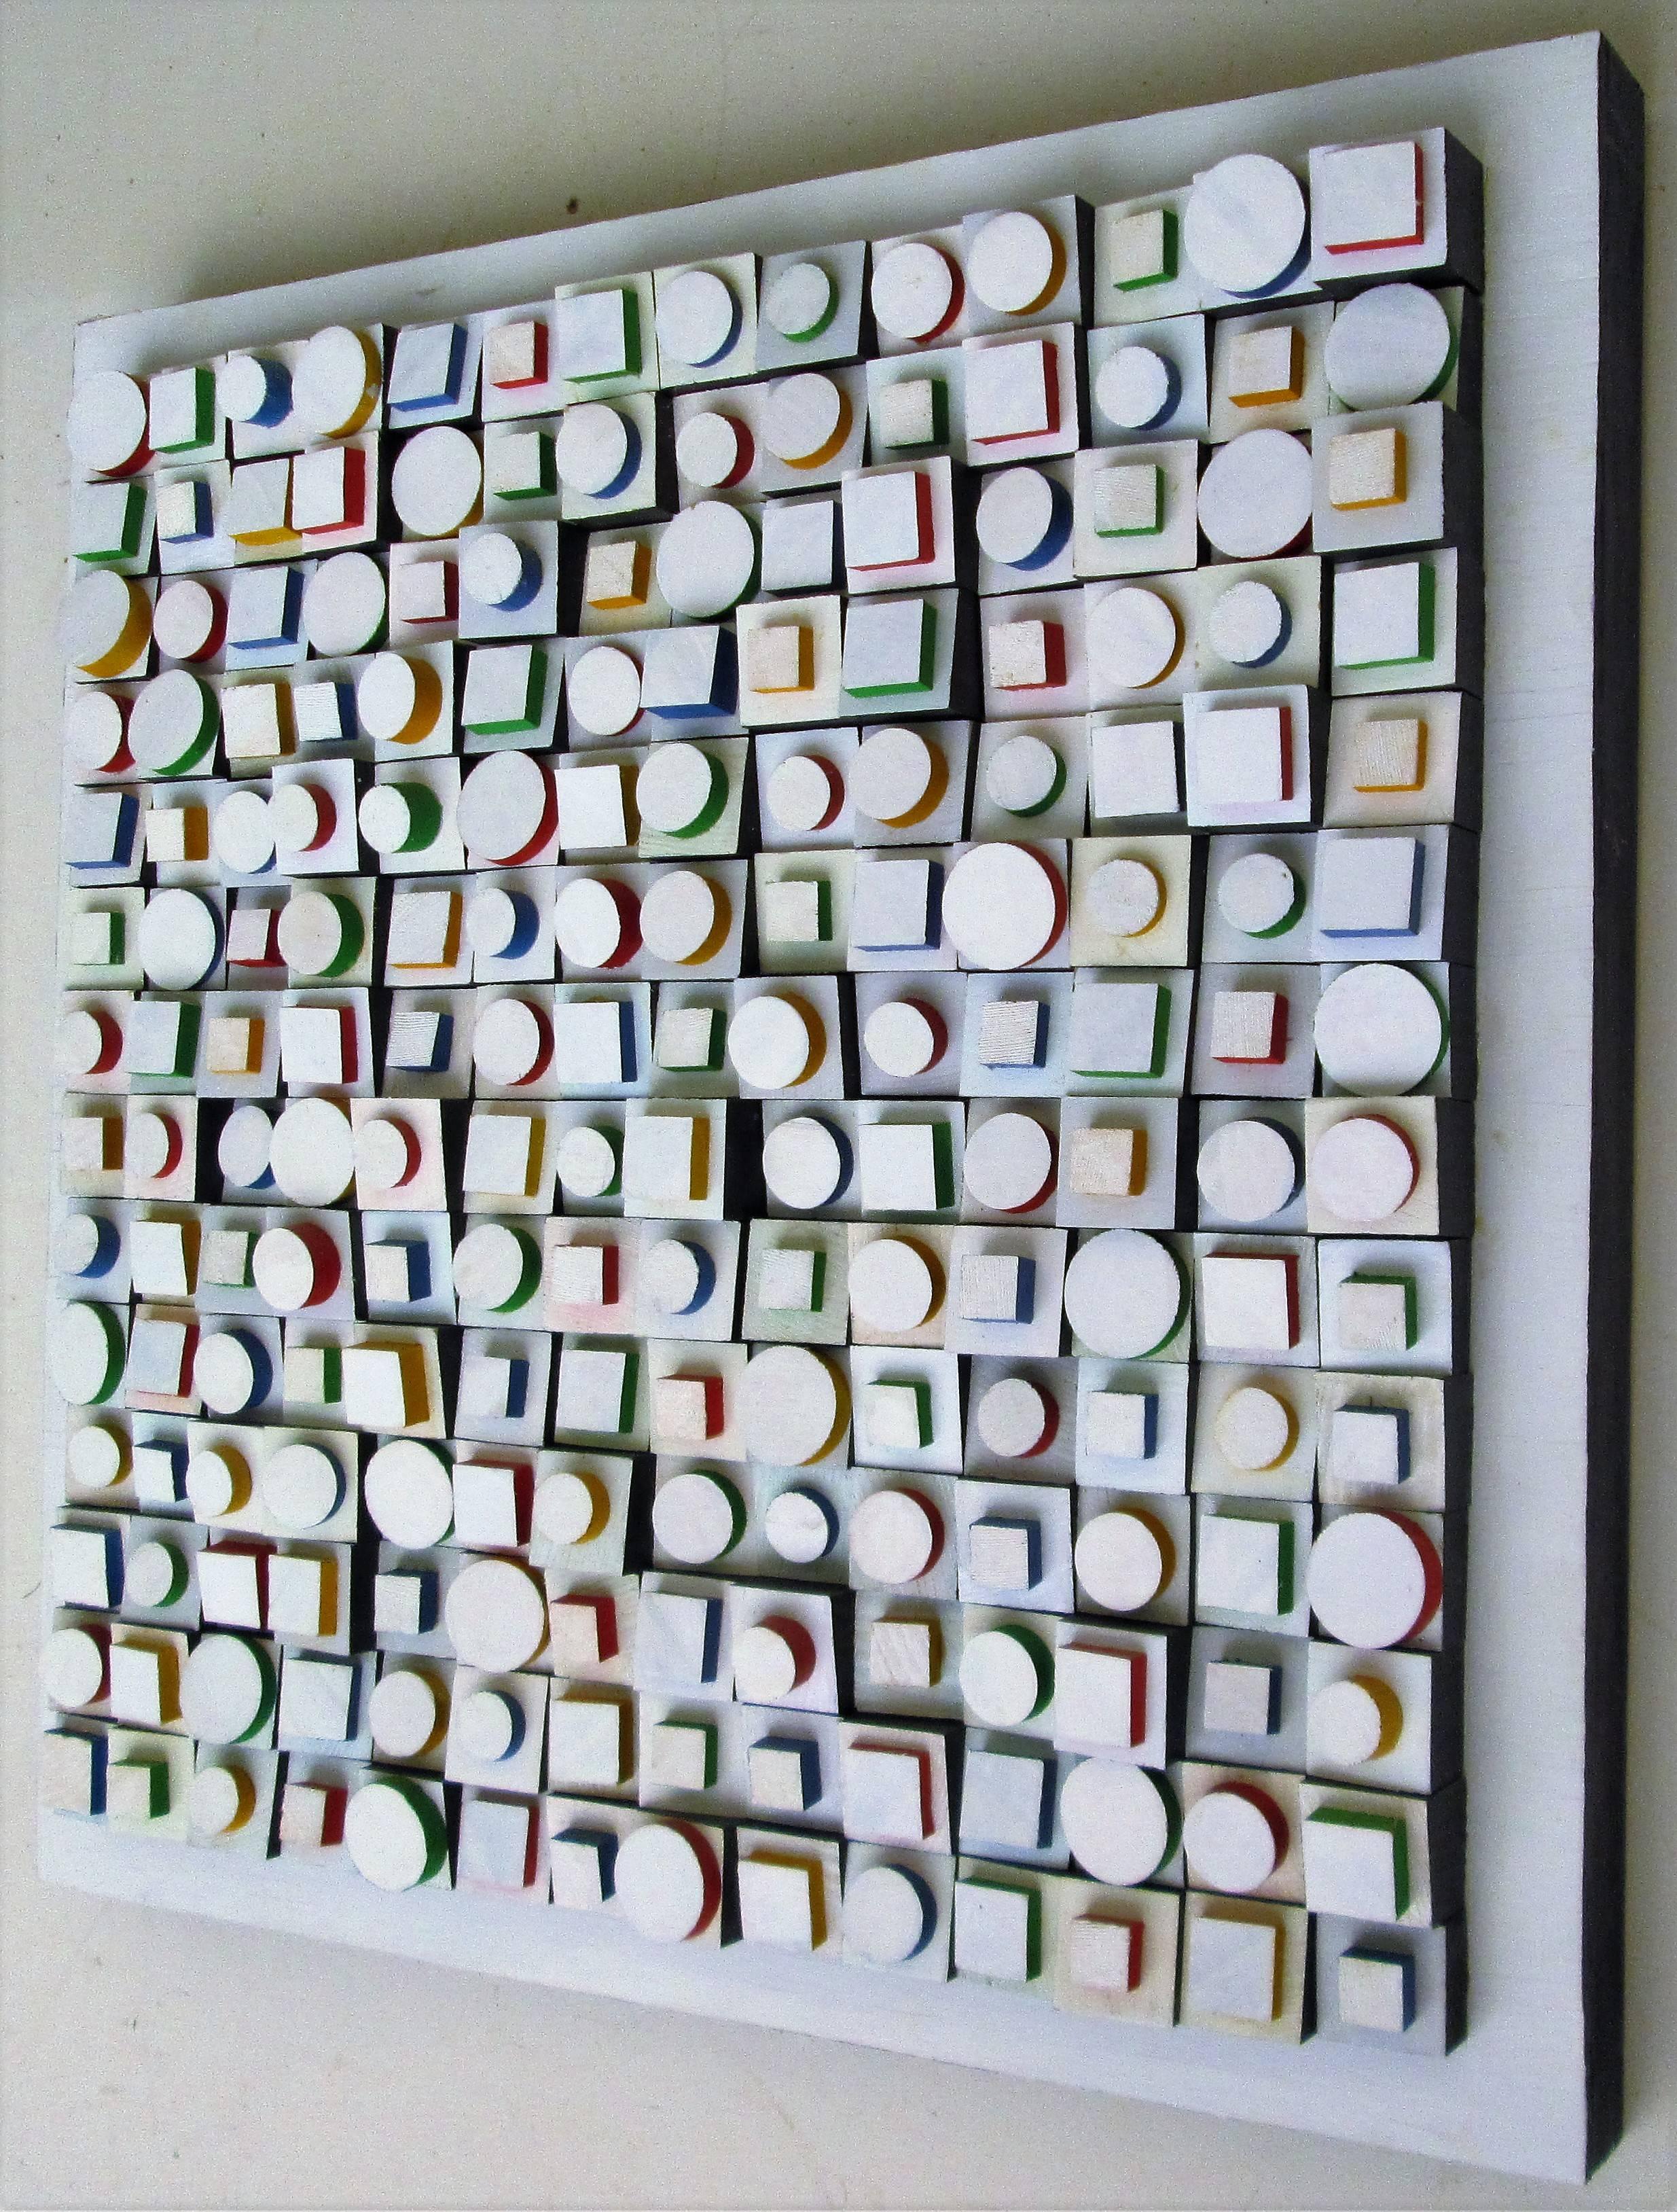 Its All How You Look At It (White and Multi-Colored Abstract Wall Sculpture) - Painting by Stephen Walling